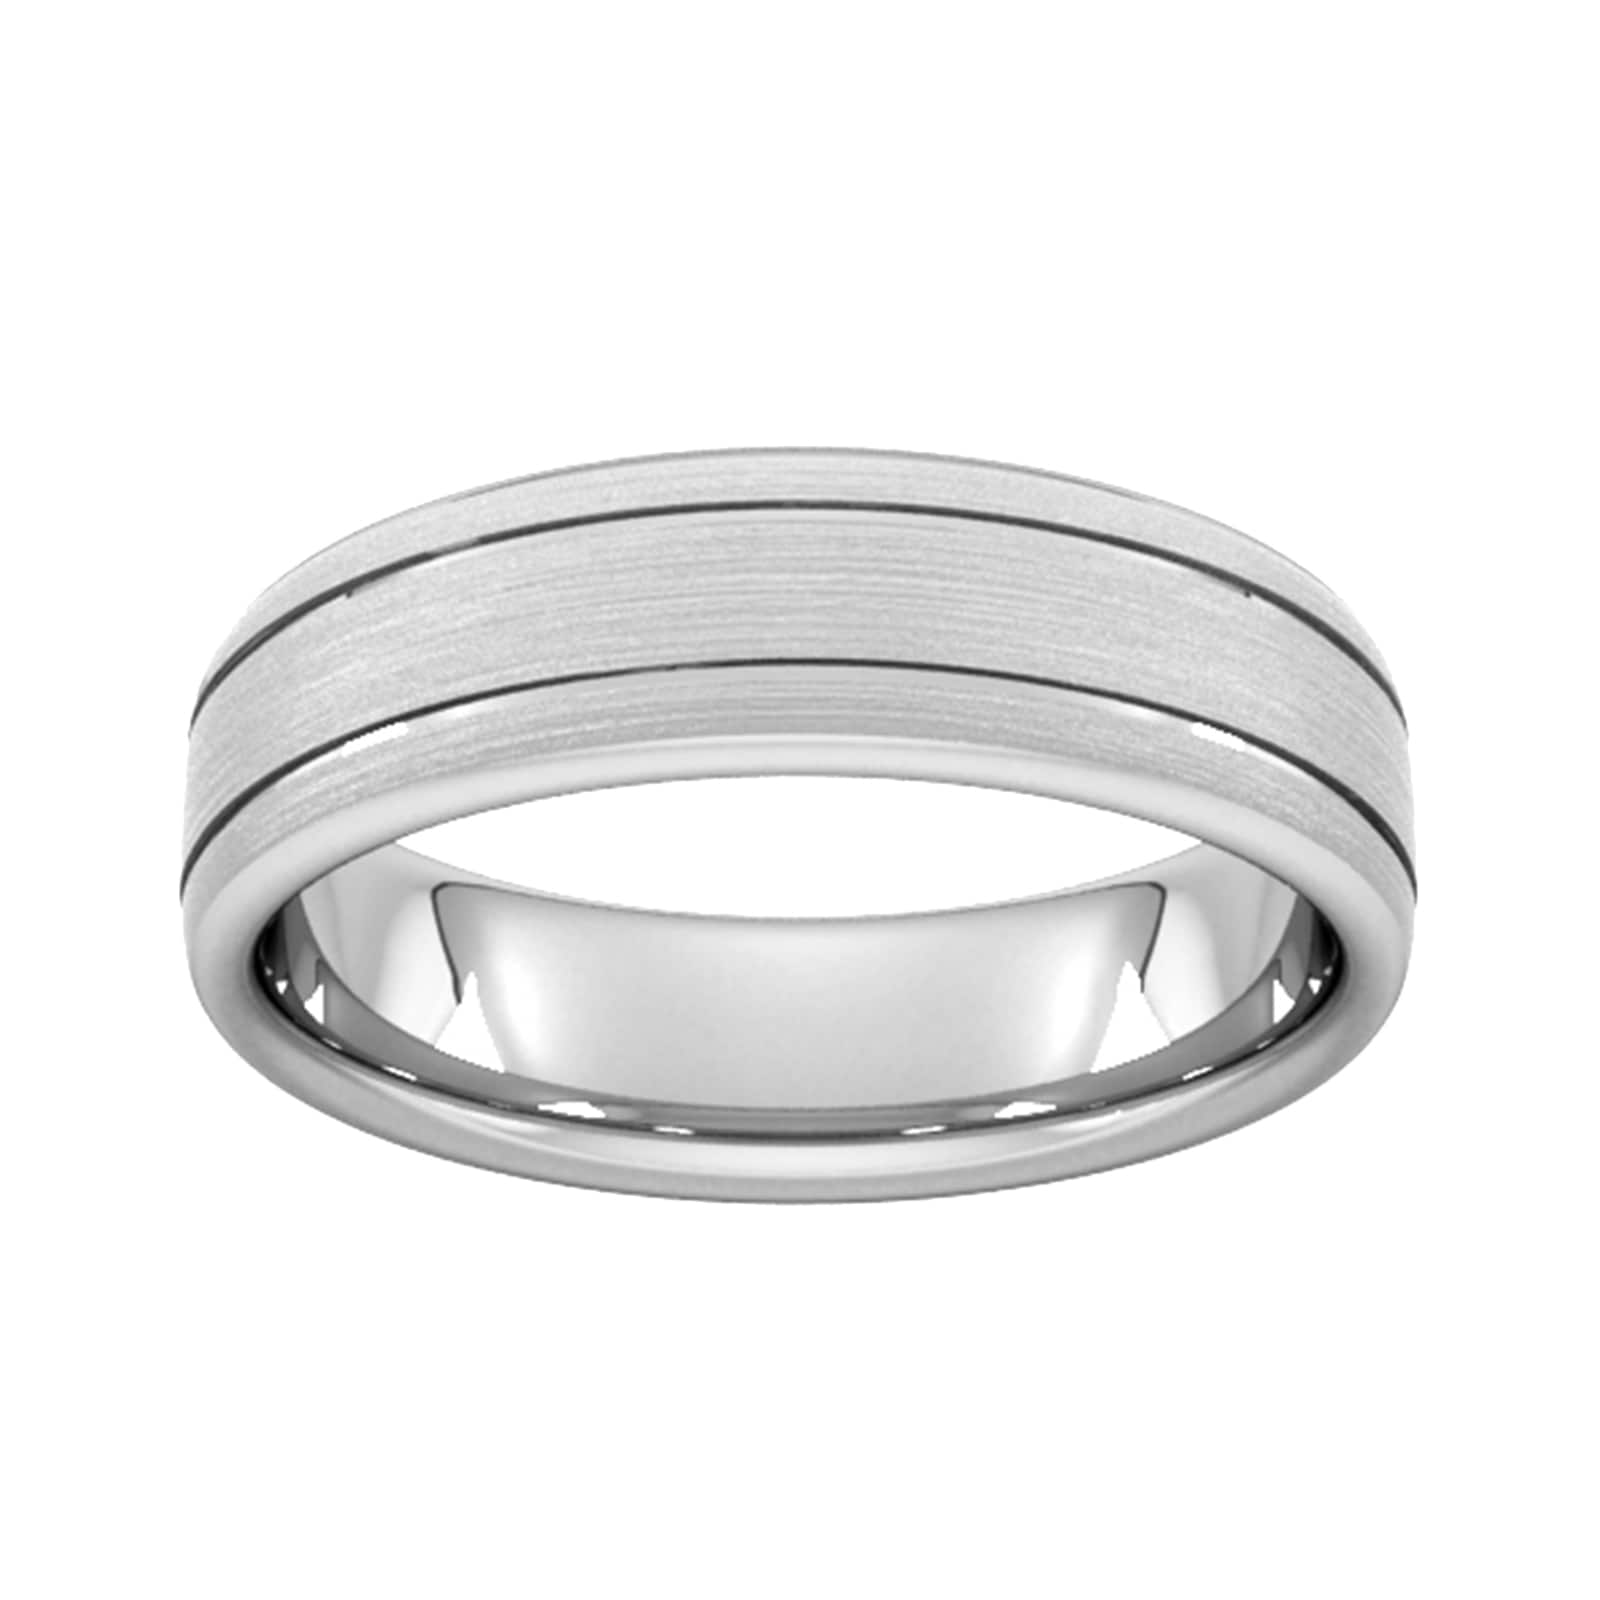 6mm Slight Court Heavy Matt Finish With Double Grooves Wedding Ring In 950 Palladium - Ring Size H